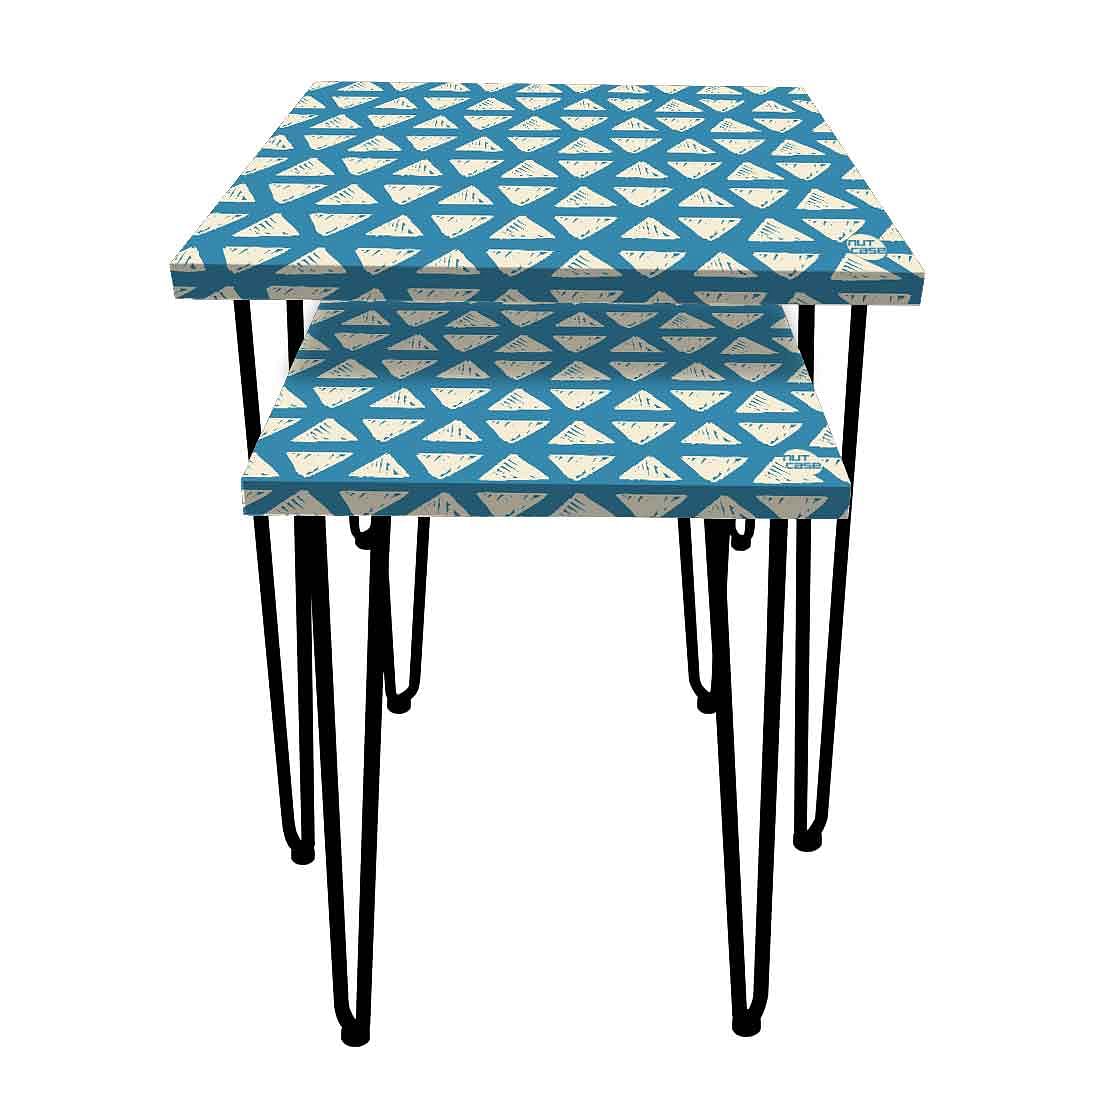 Small & Large Nest of Tables Coffee Table for Living Room Decor - Triangle Nutcase